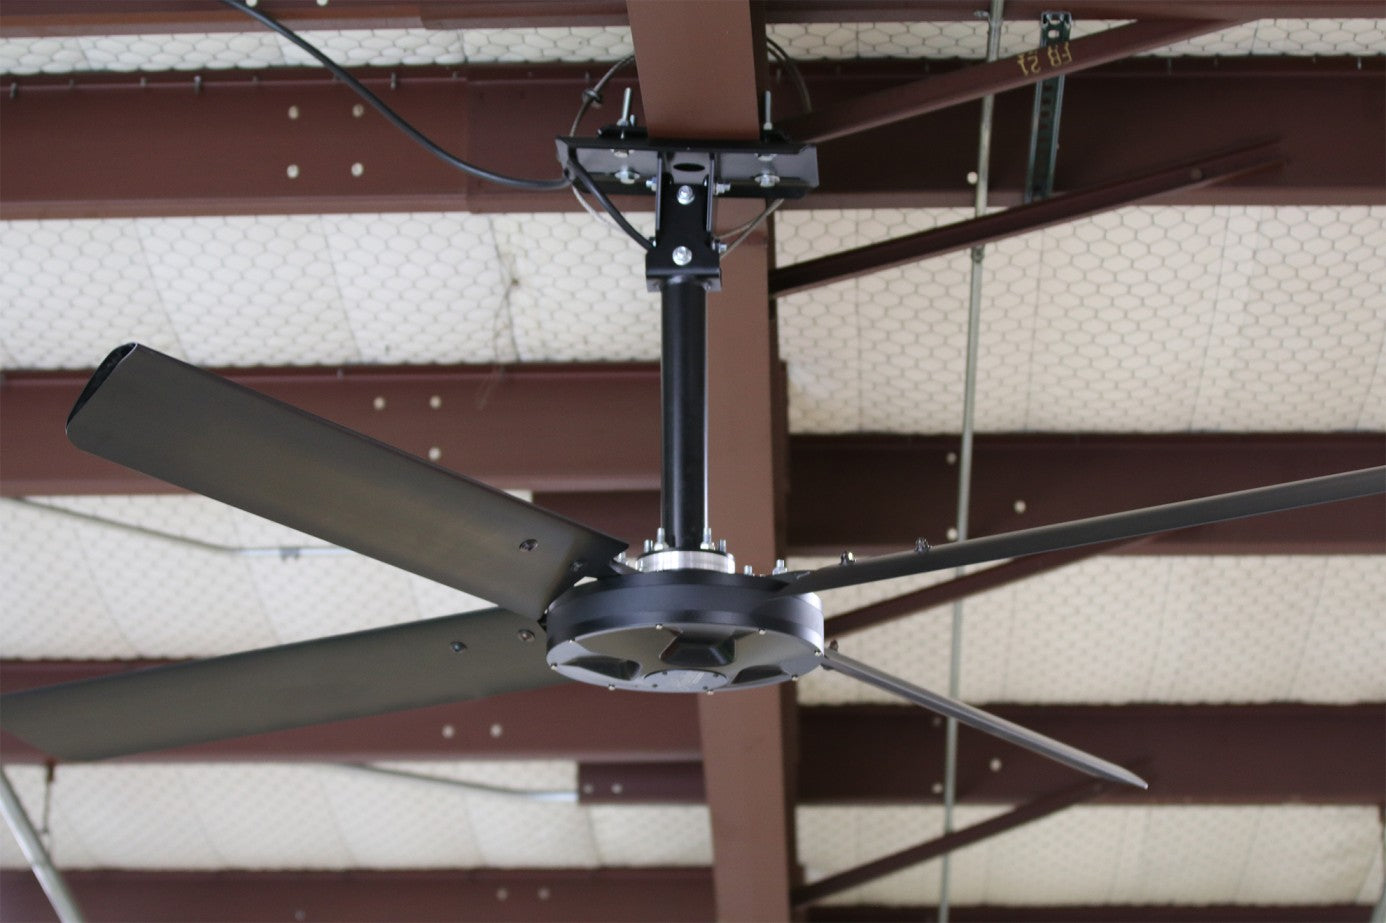 Industrial HVLS Ceiling Fan Buying Guide: How to Choose the Best Industrial Ceiling Fan